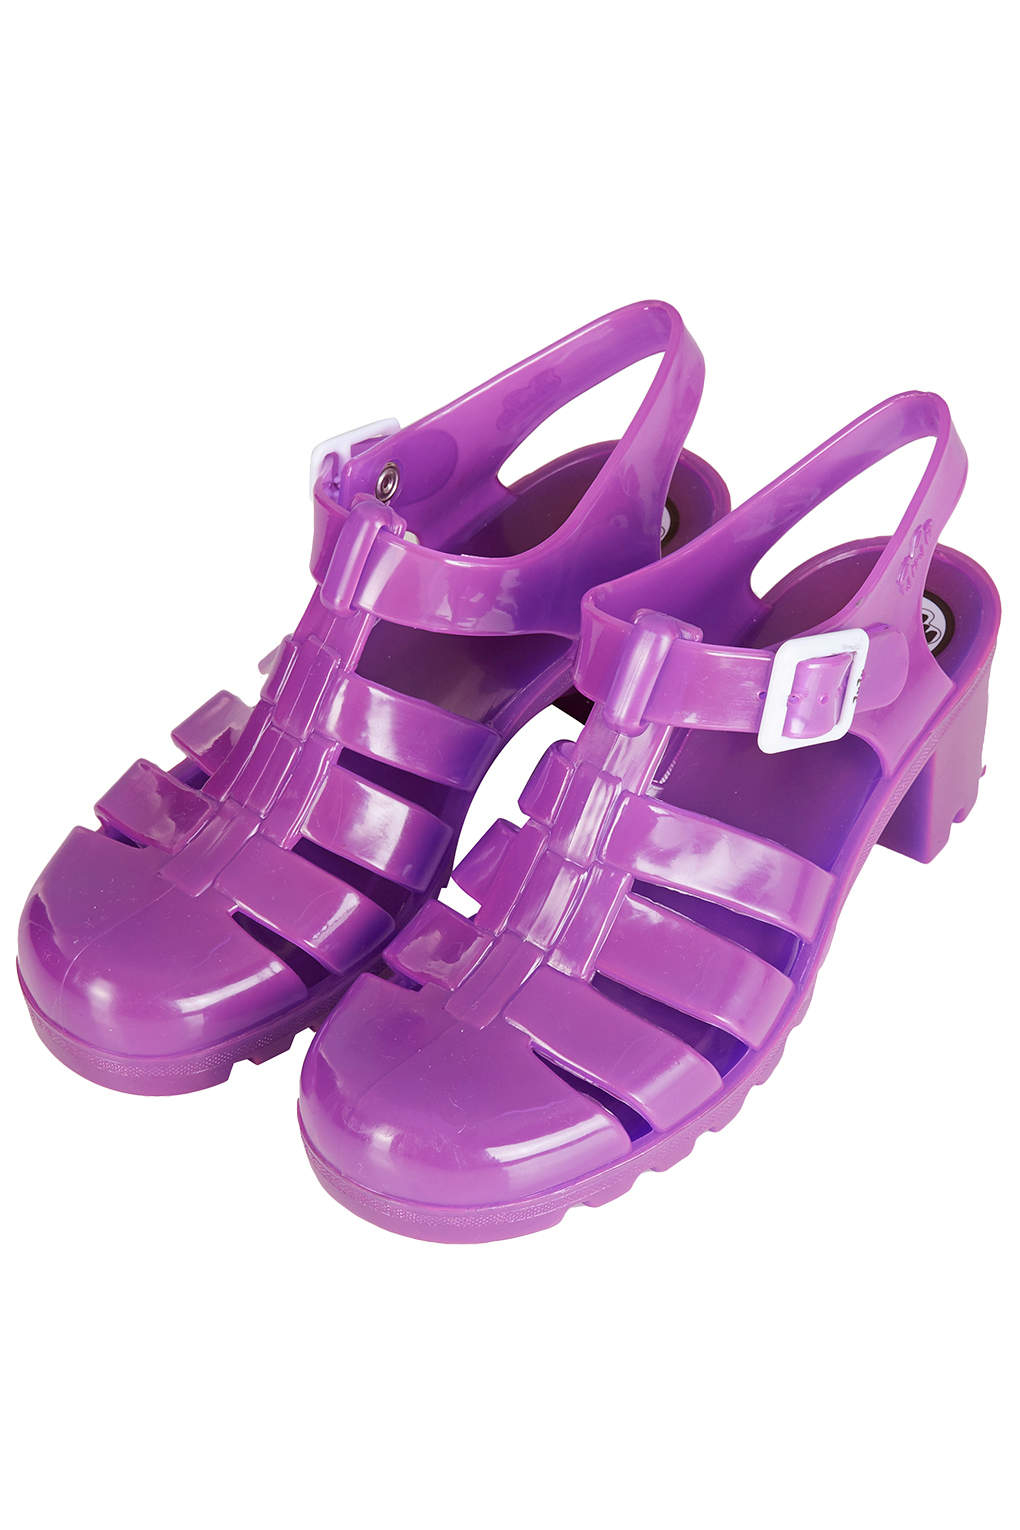 TOPSHOP Nina Heeled Jelly  Sandals  in Purple  Lyst